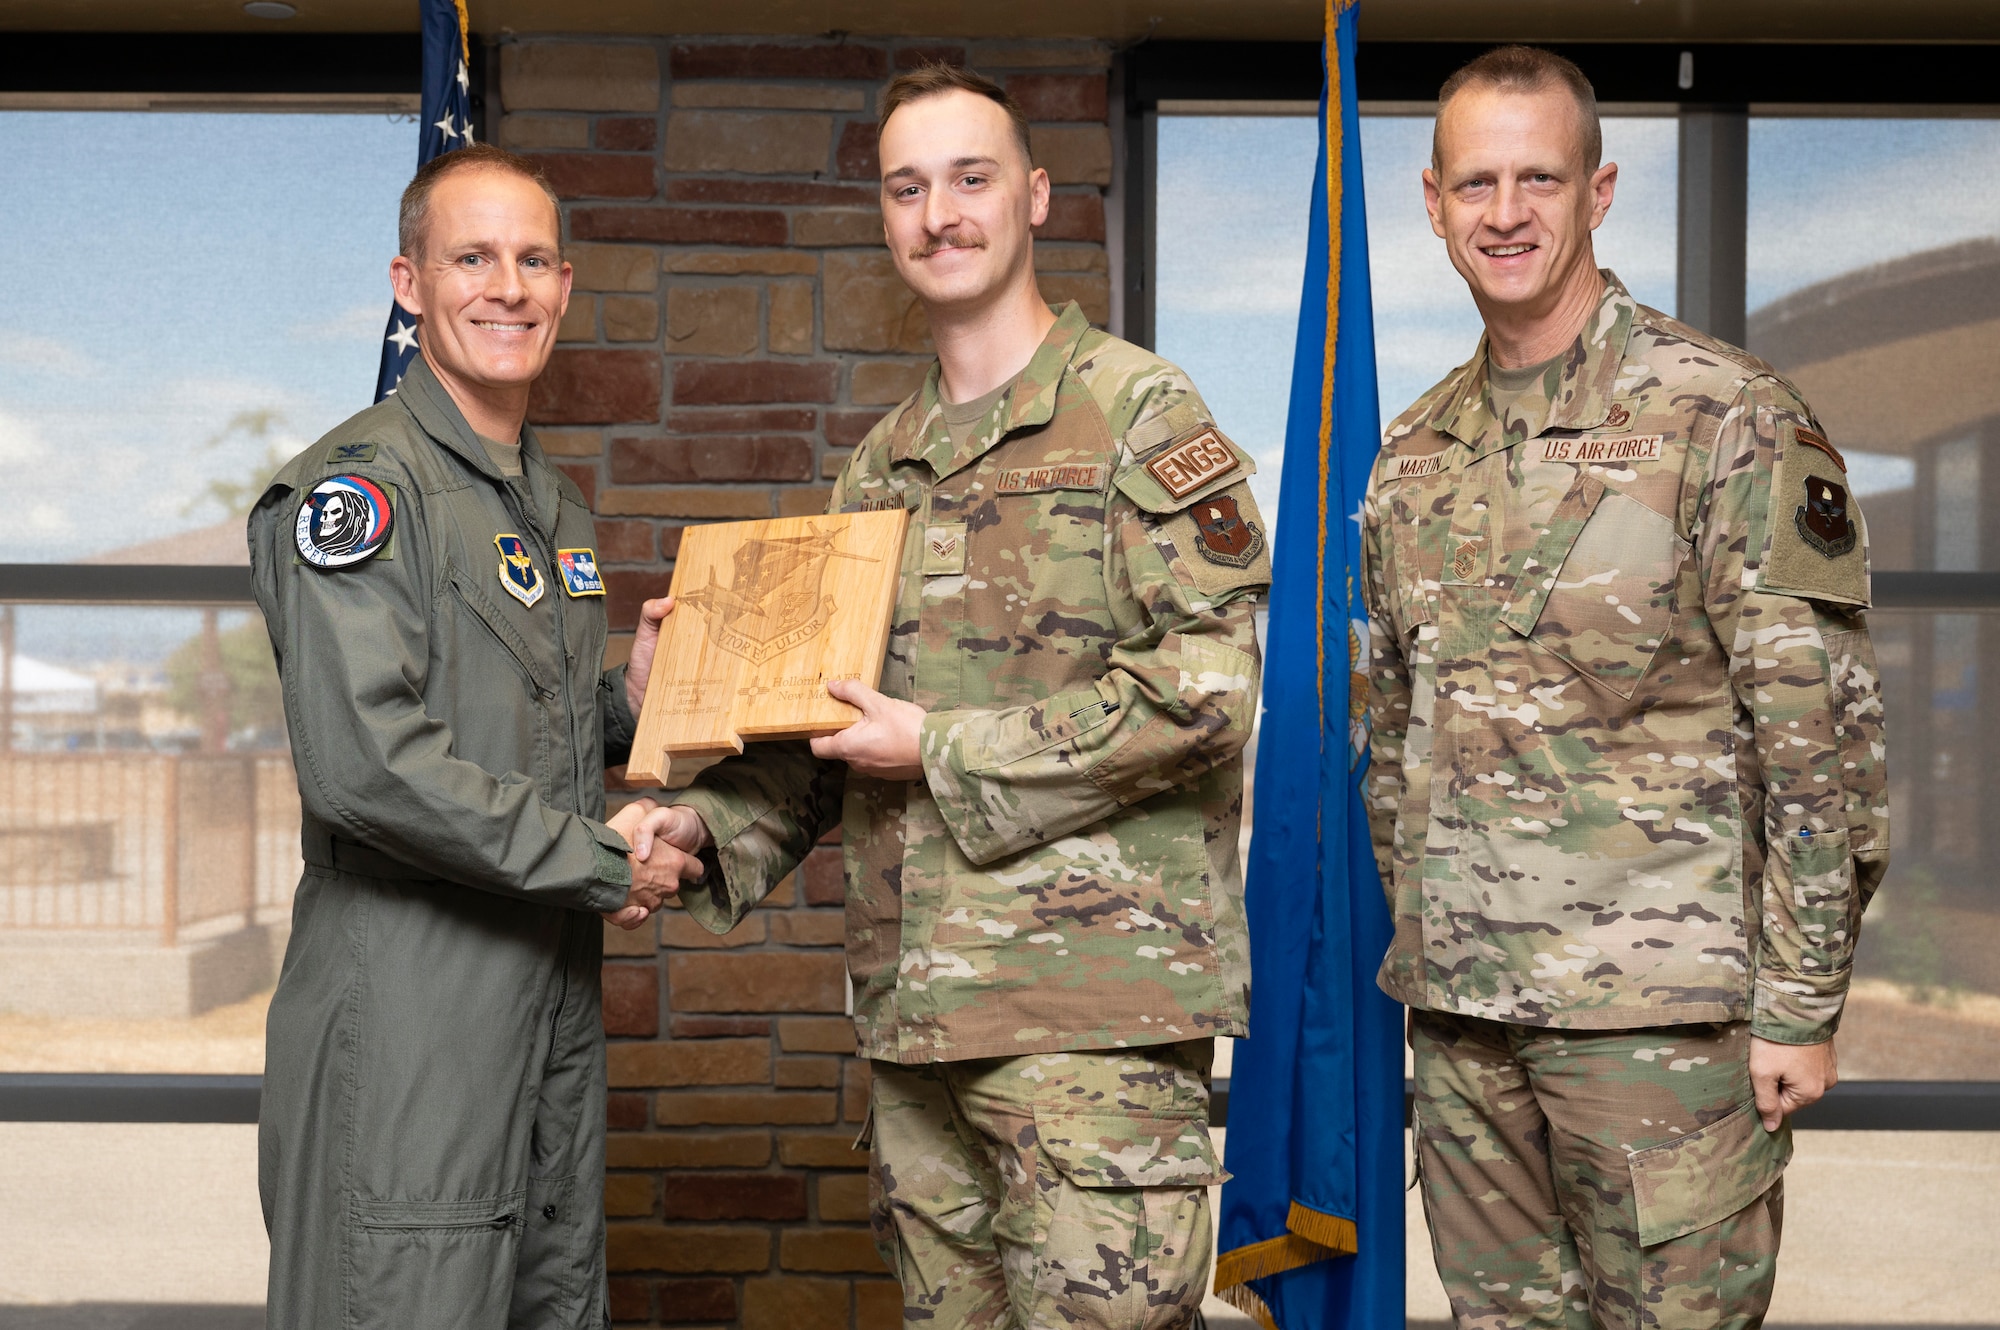 U.S. Air Force Senior Airman Mitchell Dunson, from the 49th Component Maintenance Squadron, accepts the 49th Wing Airman of the Quarter Award, during the 49th Wing’s 2nd Quarter Award ceremony at Holloman Air Force Base, New Mexico, Aug. 11, 2023. Quarterly award winners were selected based on their technical expertise, demonstration of leadership and job performance. (U.S. Air Force photo by Airman 1st Class Michelle Ferrari)